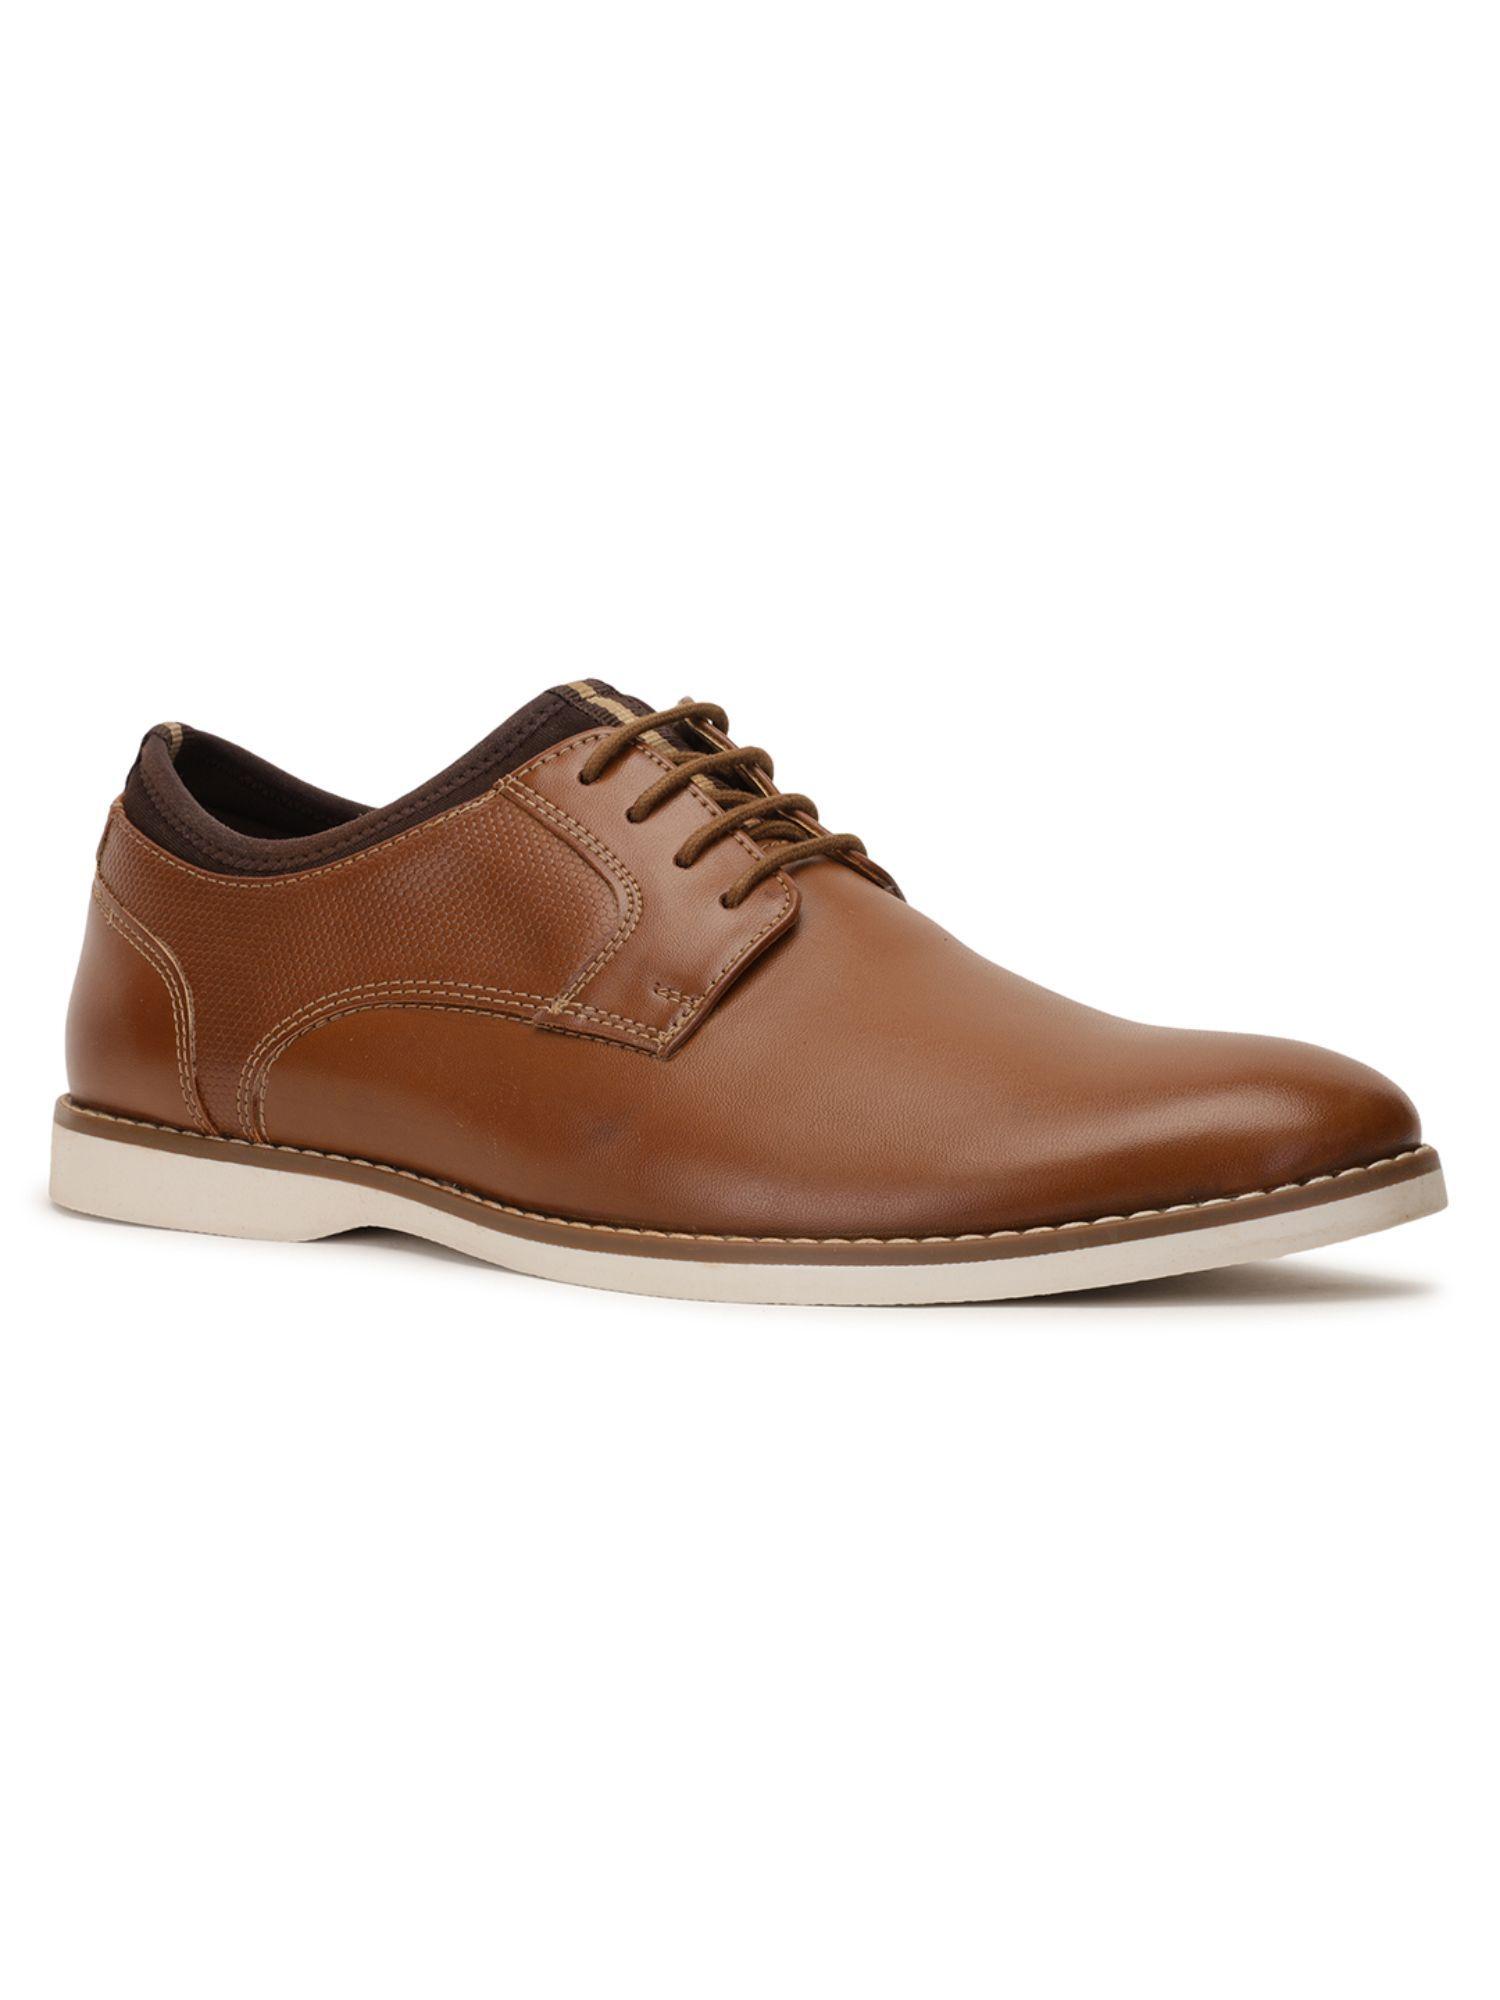 solid brown casual shoes